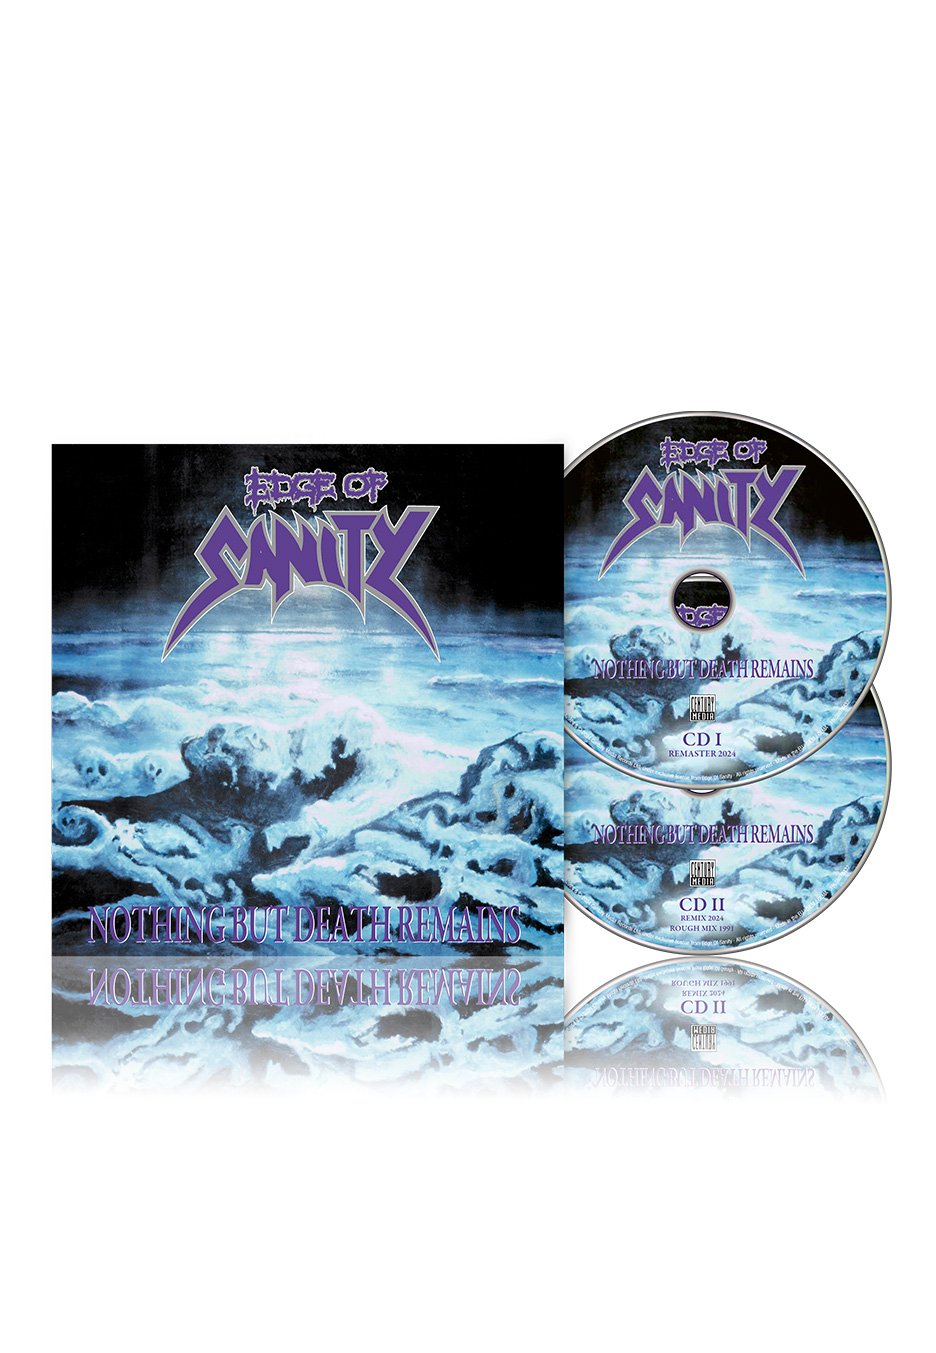 Edge Of Sanity - Nothing But Death Remains (Re-Issue) Ltd. - 2 CD